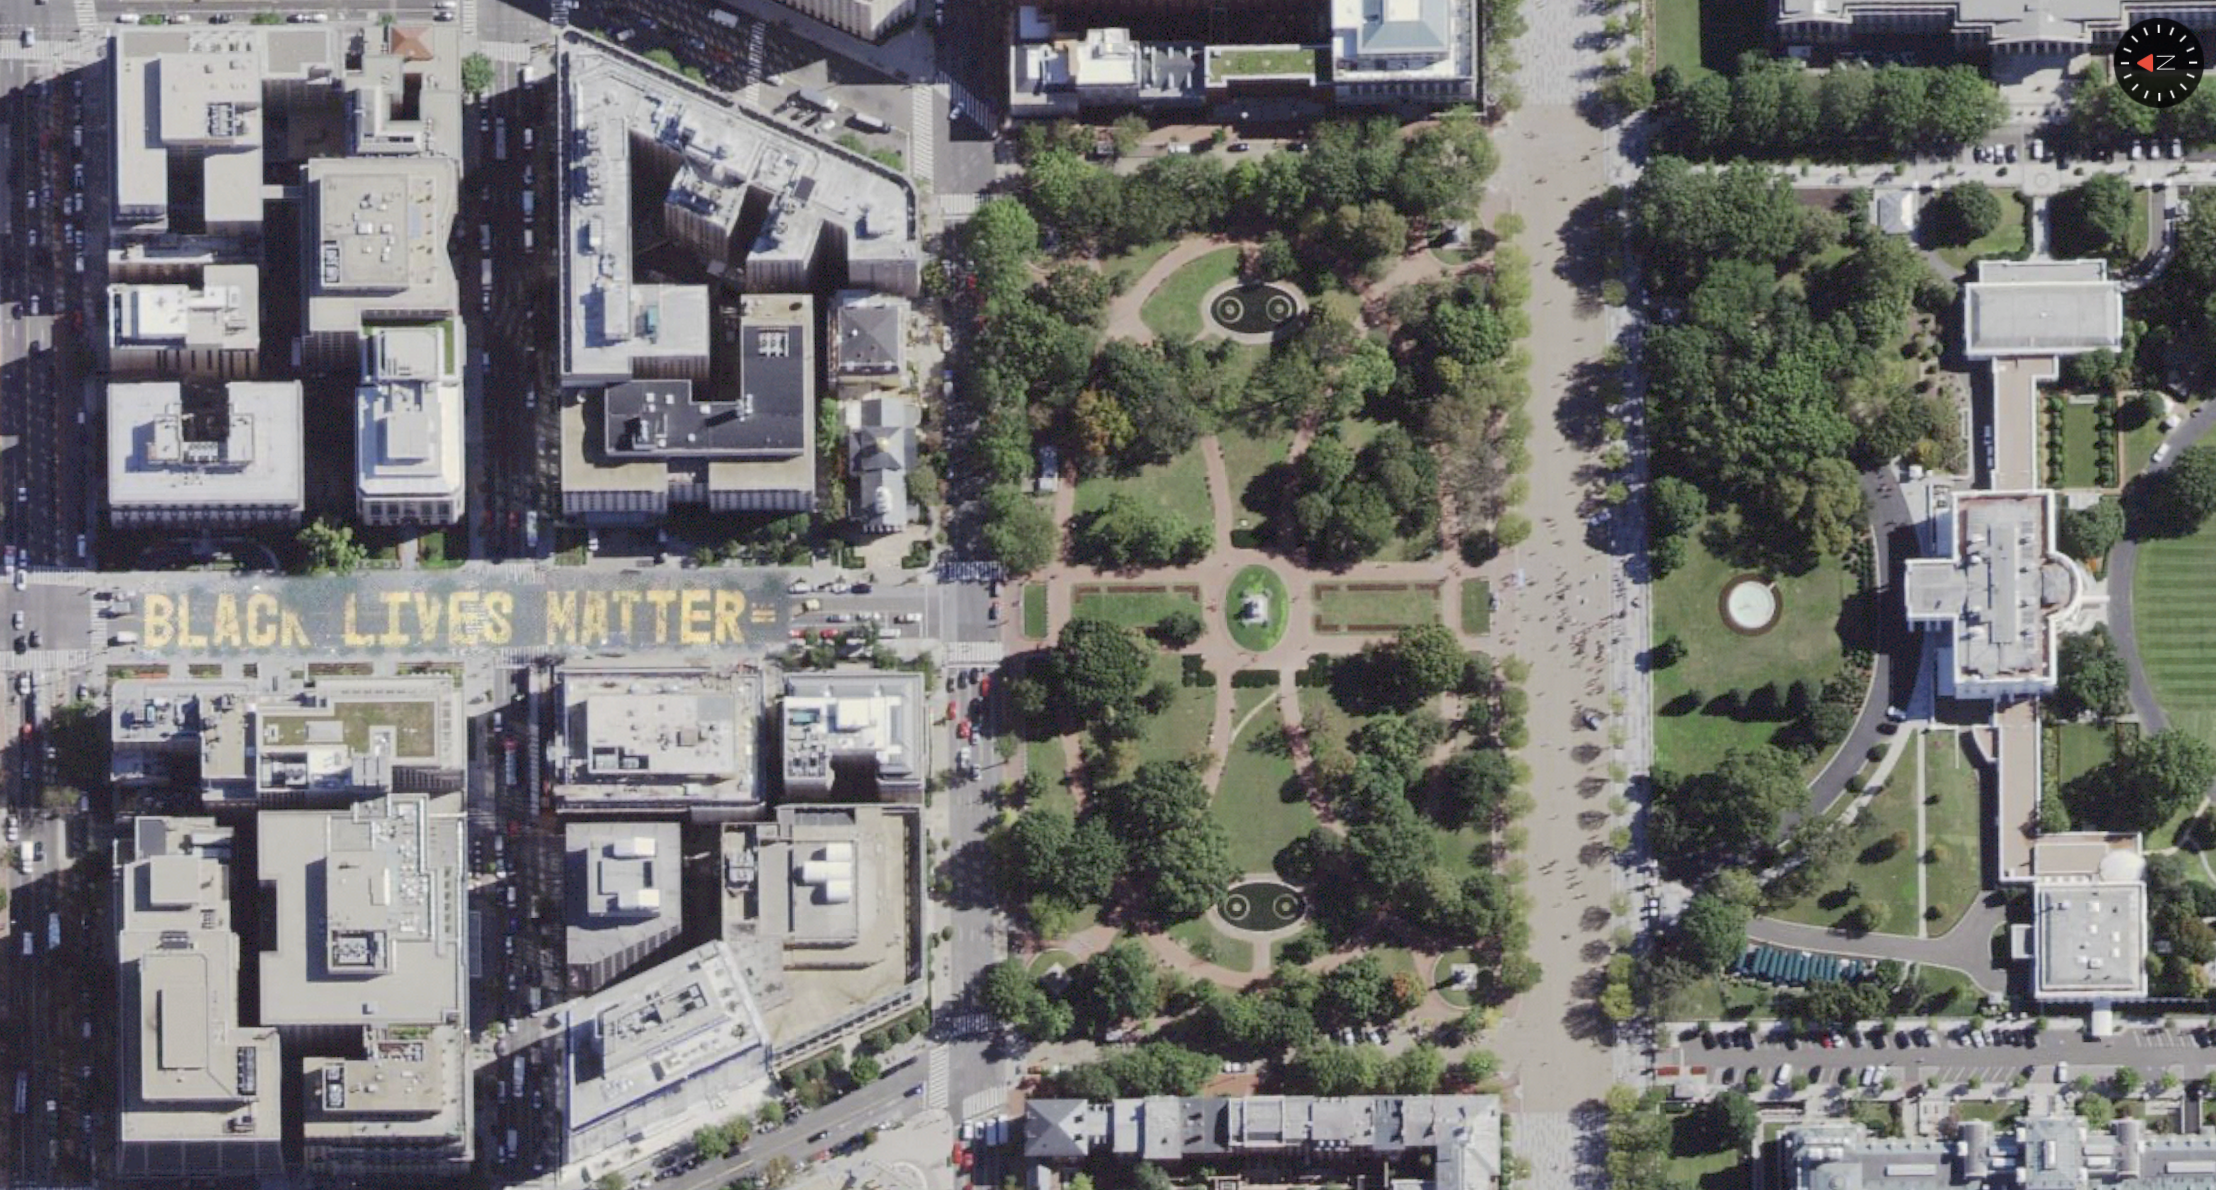 Black Lives Matter Plaza, Washington, DC - aerial photograph from Apple Maps